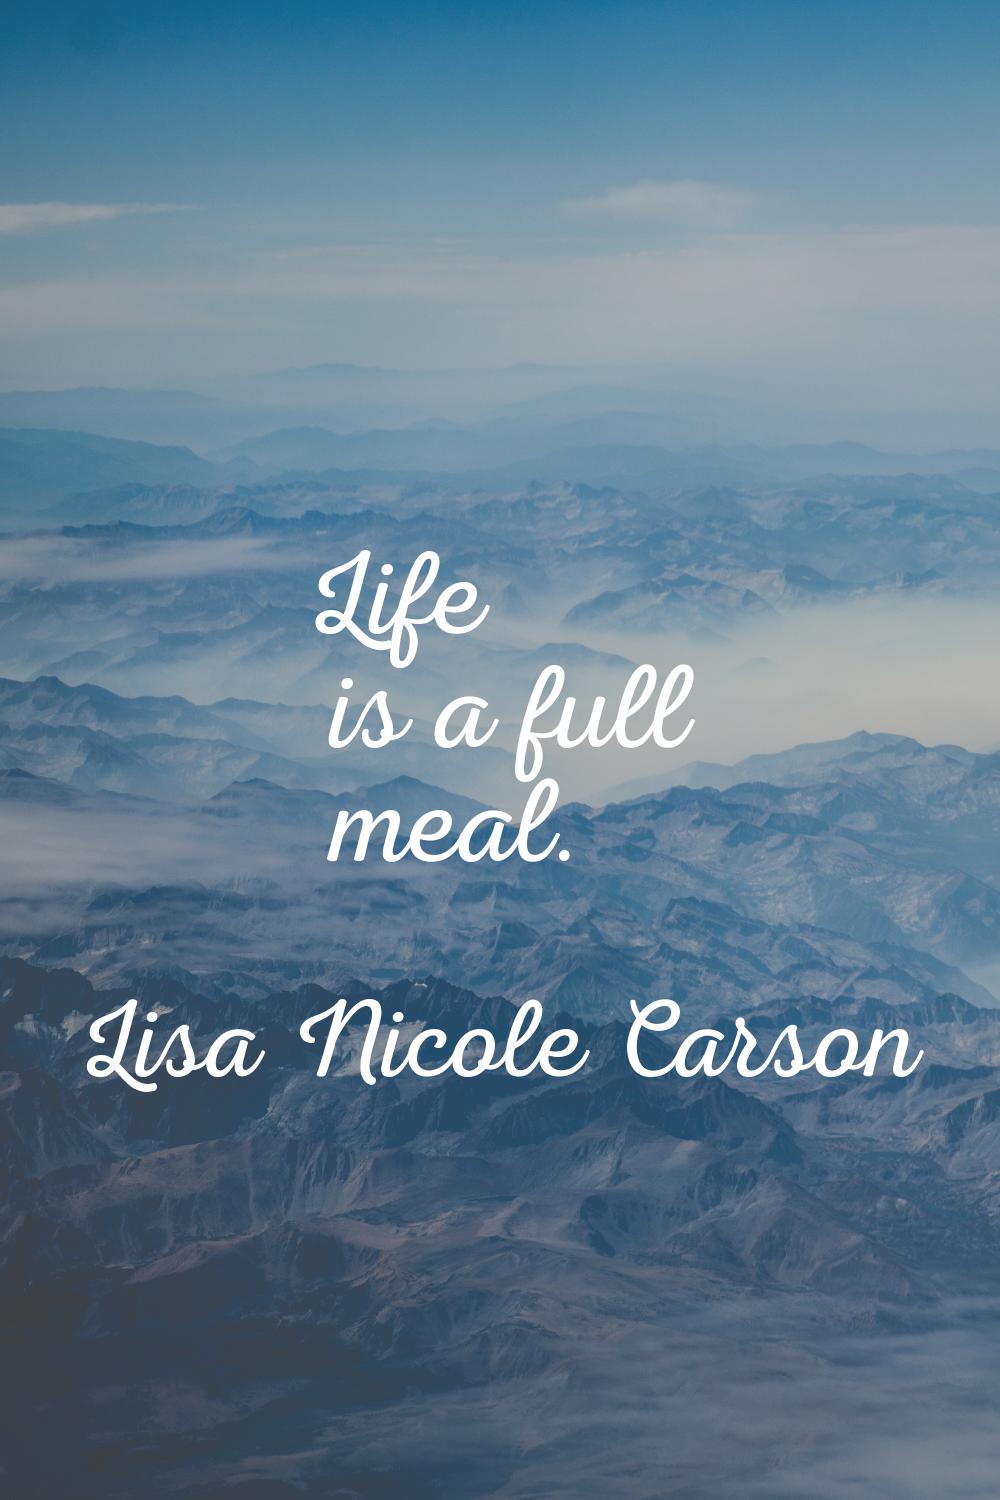 Life is a full meal.